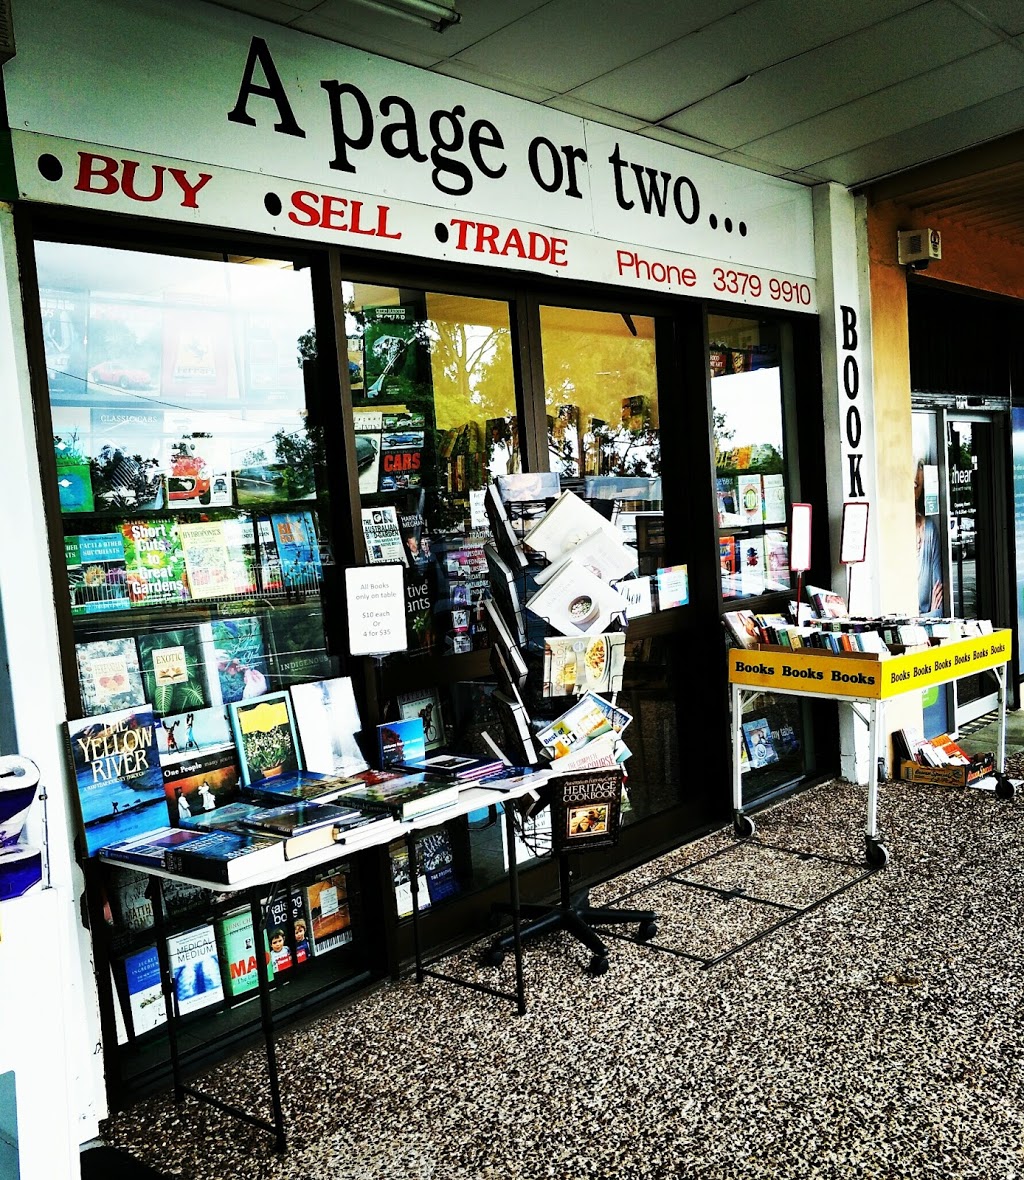 A page or two | 605 Oxley Rd, Corinda QLD 4075, Australia | Phone: (07) 3379 9910